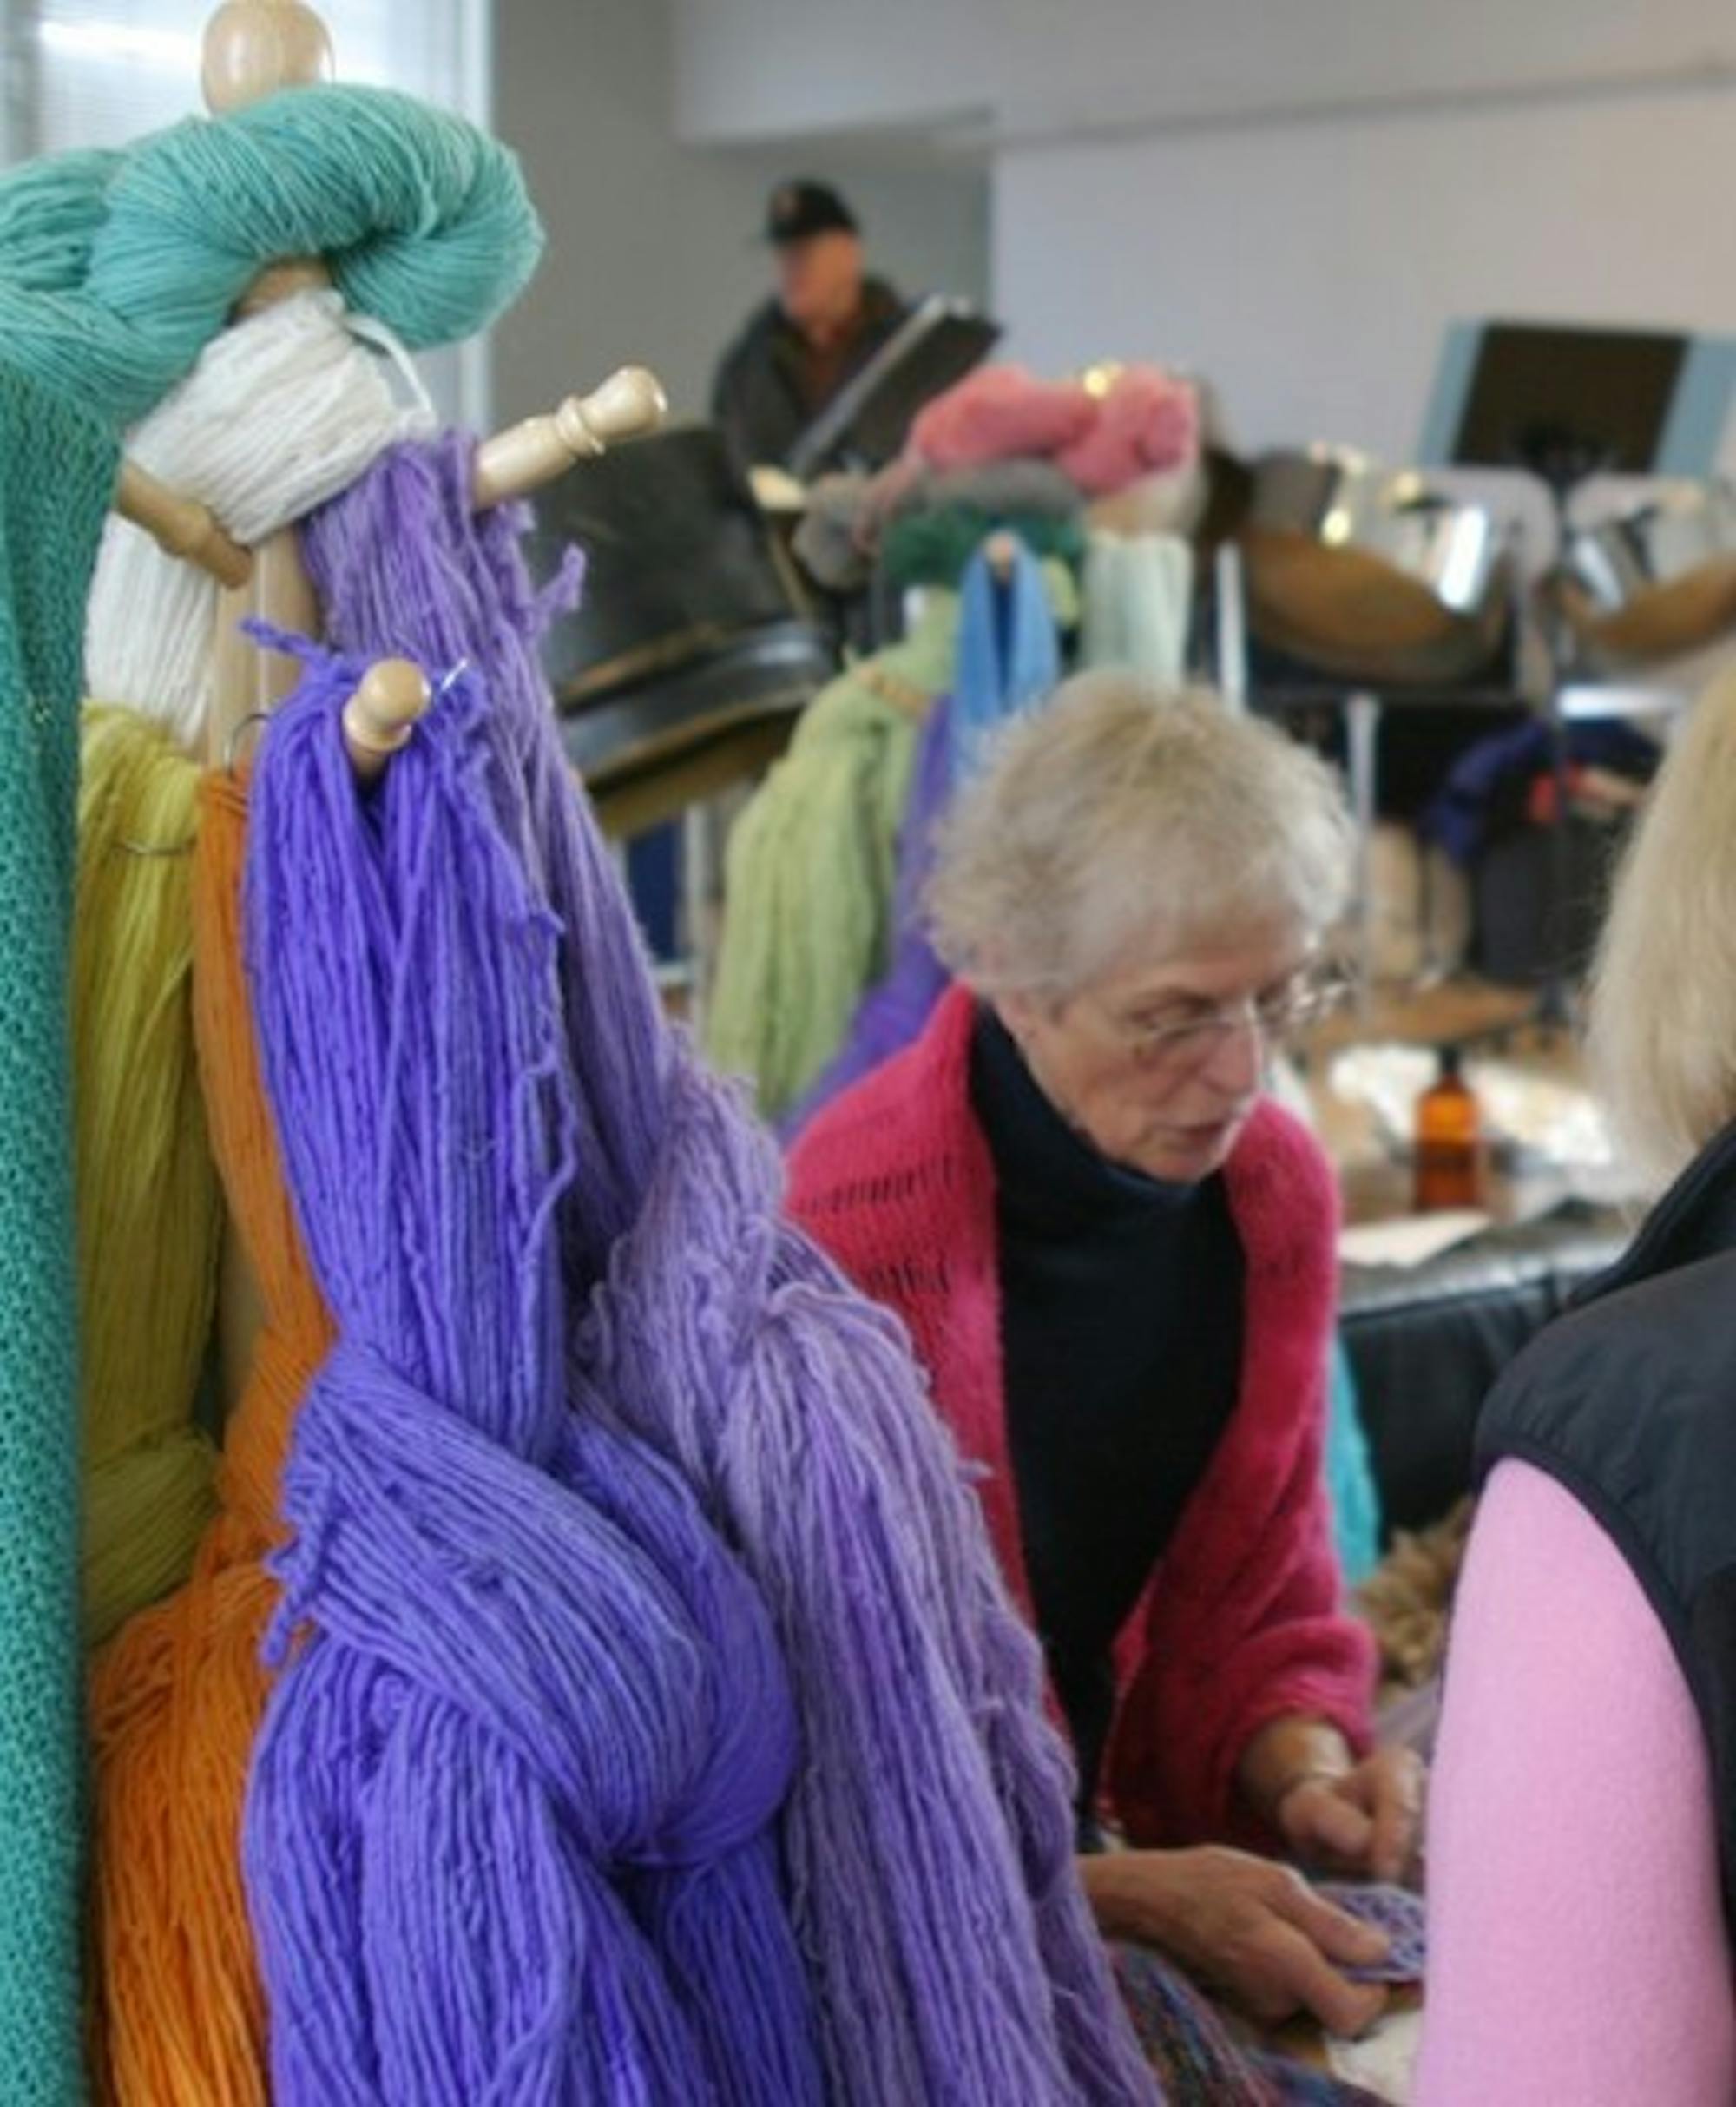 Skeins of colorful hand-spun yarn hang in the interior of Norwich's town hall Saturday while vendors exhibit their goods at the Norwich Farmers Market.